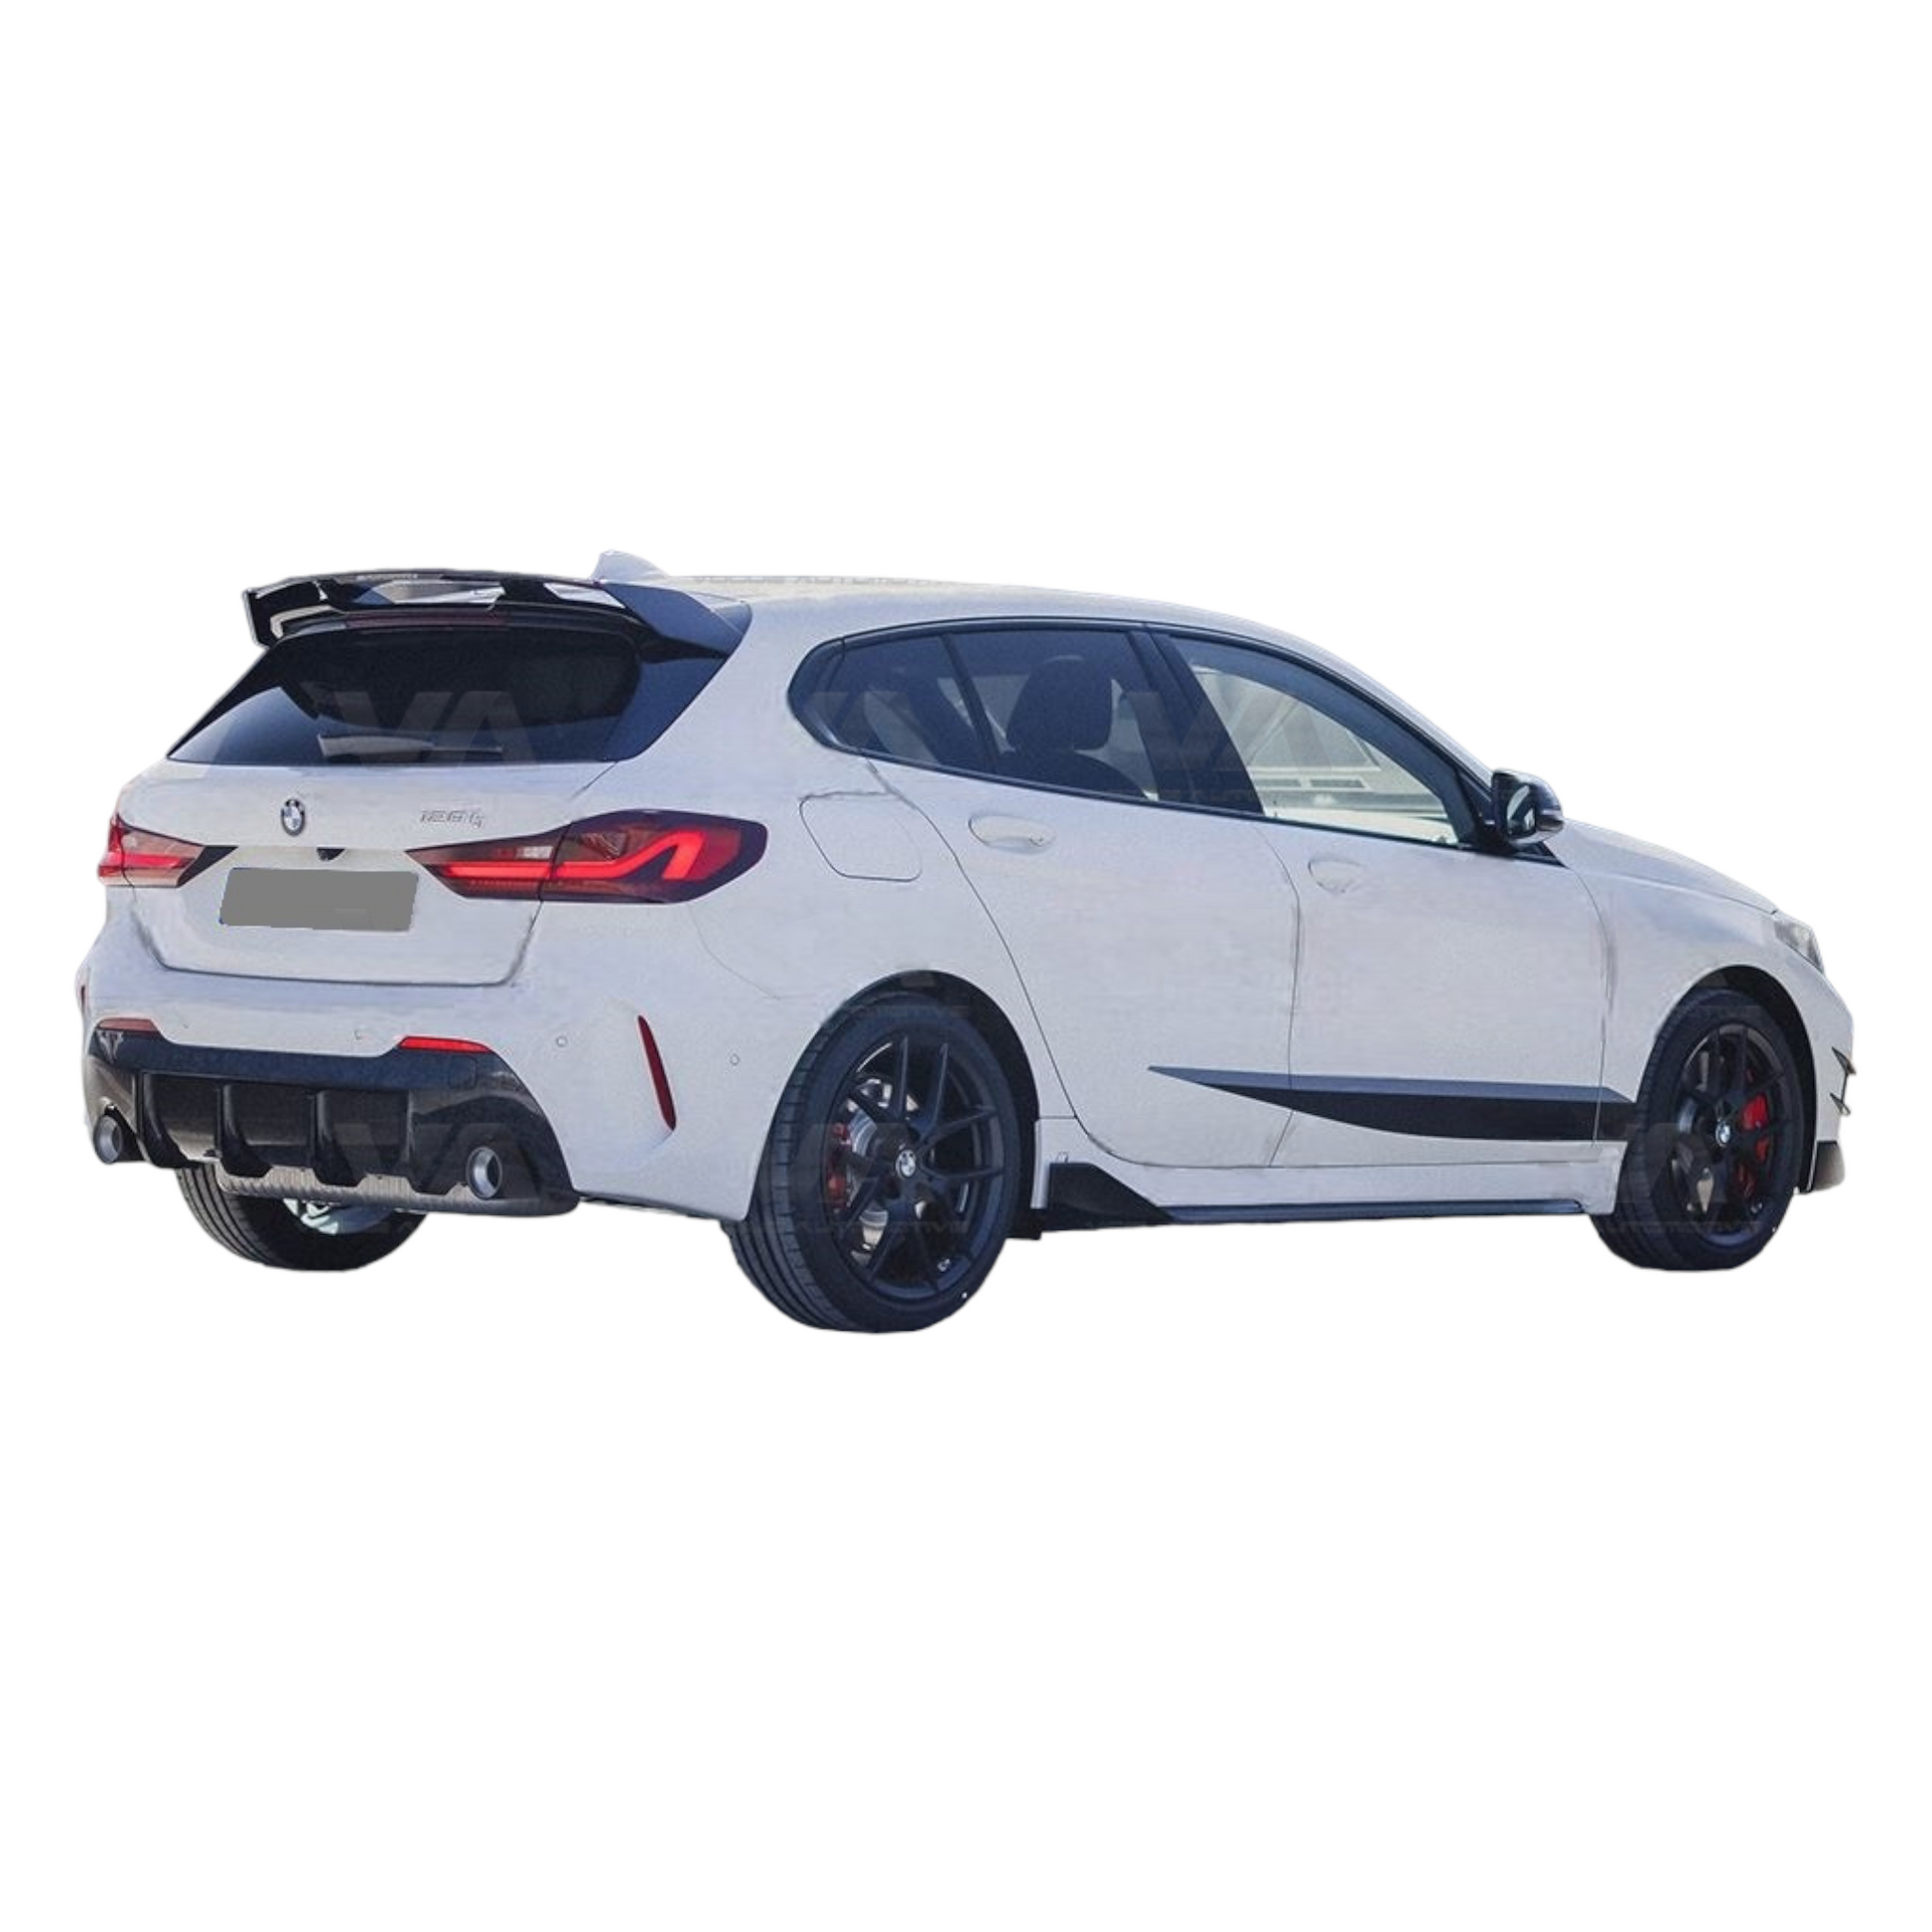 BMW 1 Series F40, Gloss Black Full Body Kit with Performance Style Package